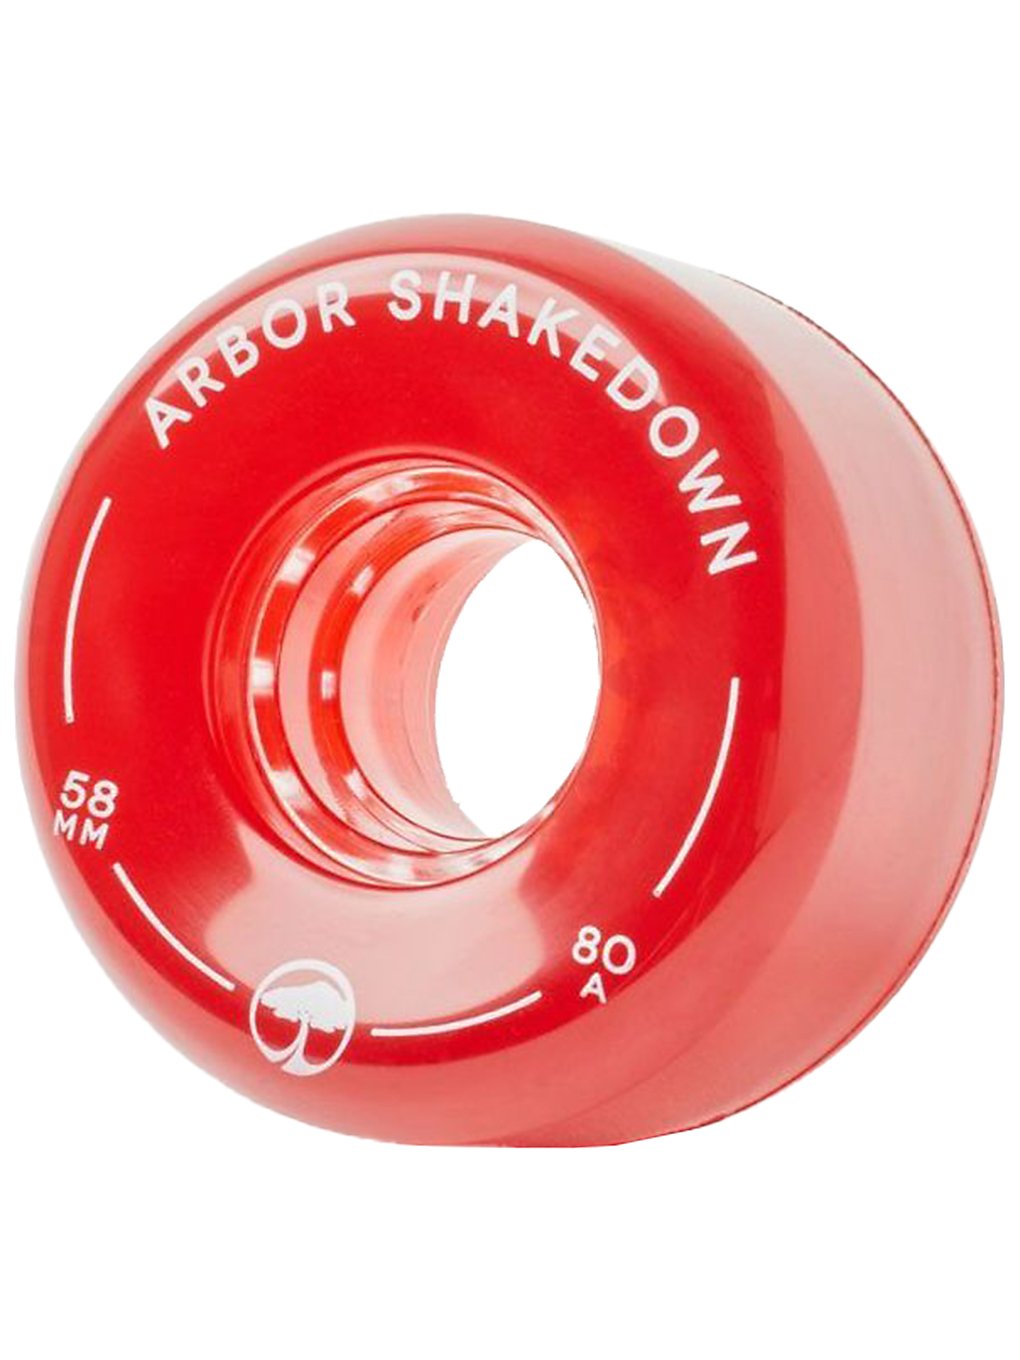 Arbor Shakedown 80a 58mm Wheels vintage red